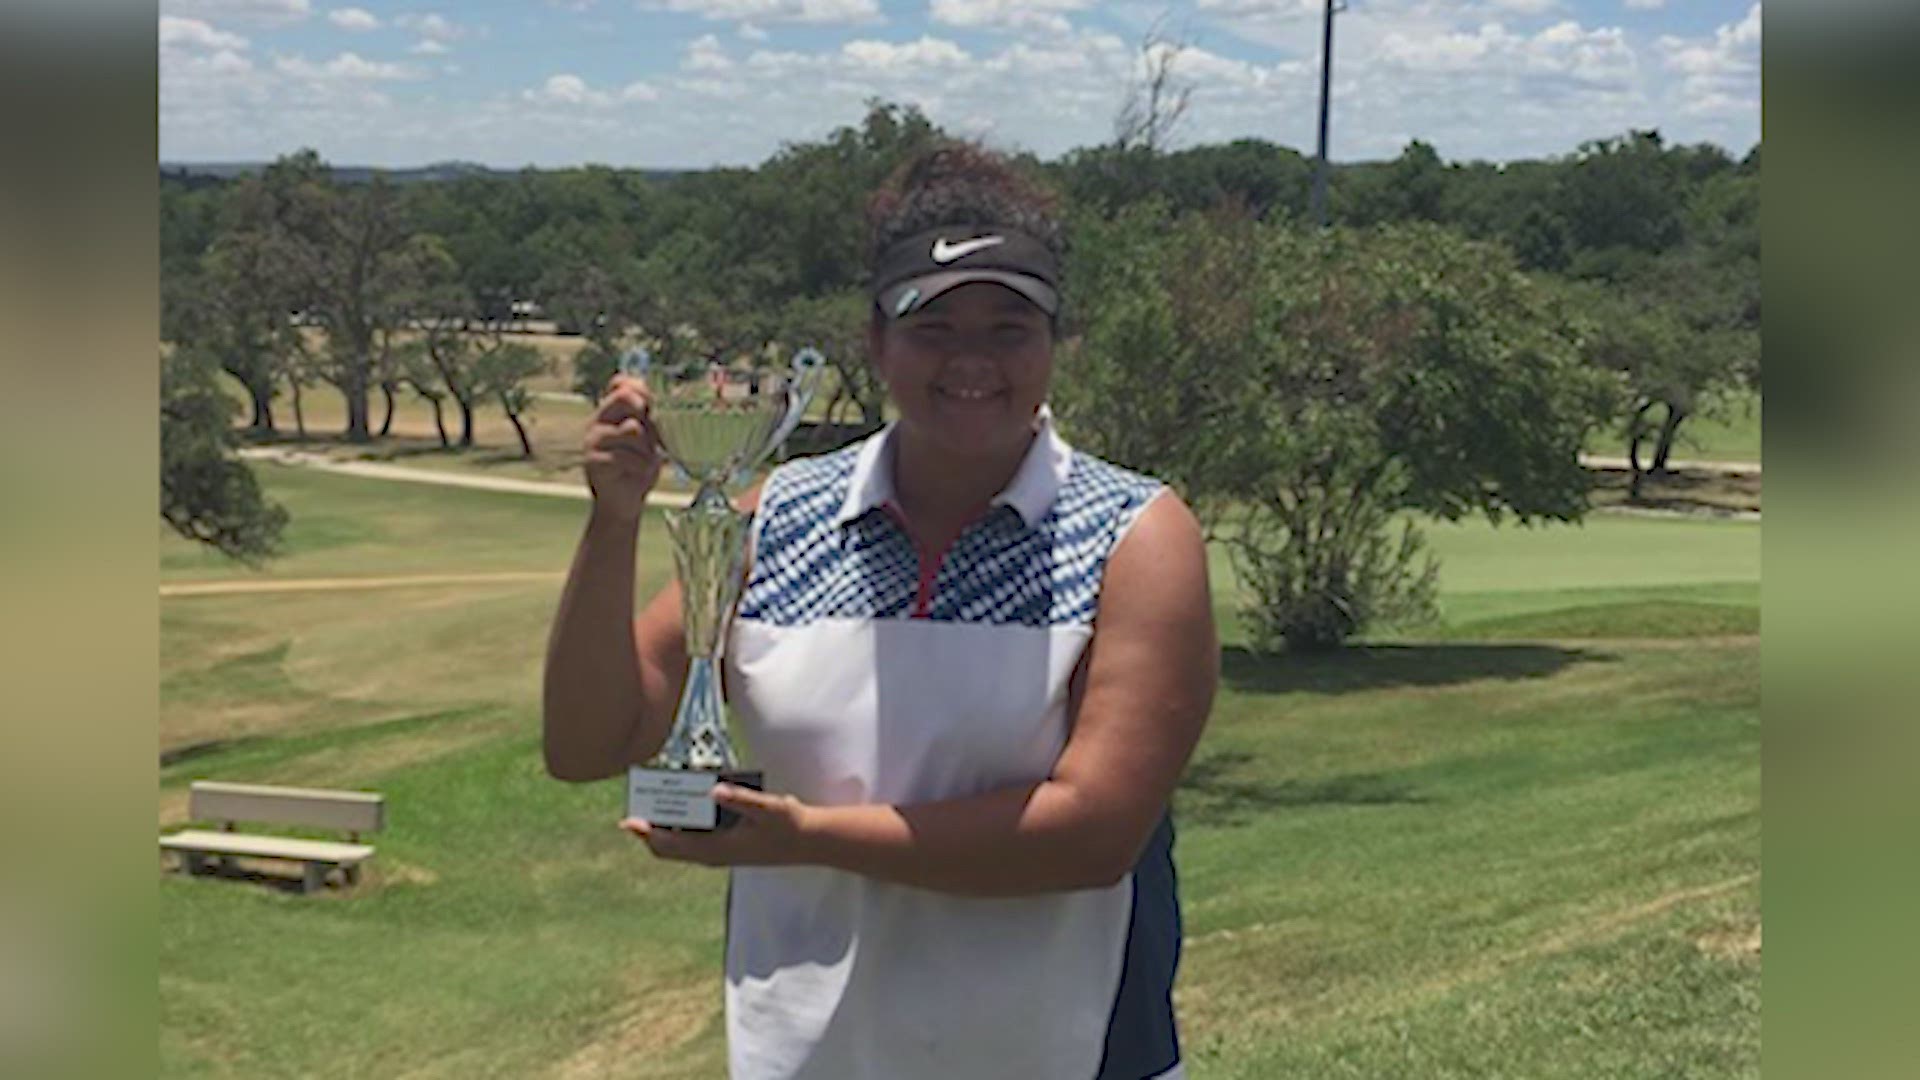 Sarah Aitchison plays final tournament in Big Country before heading to Texas Western